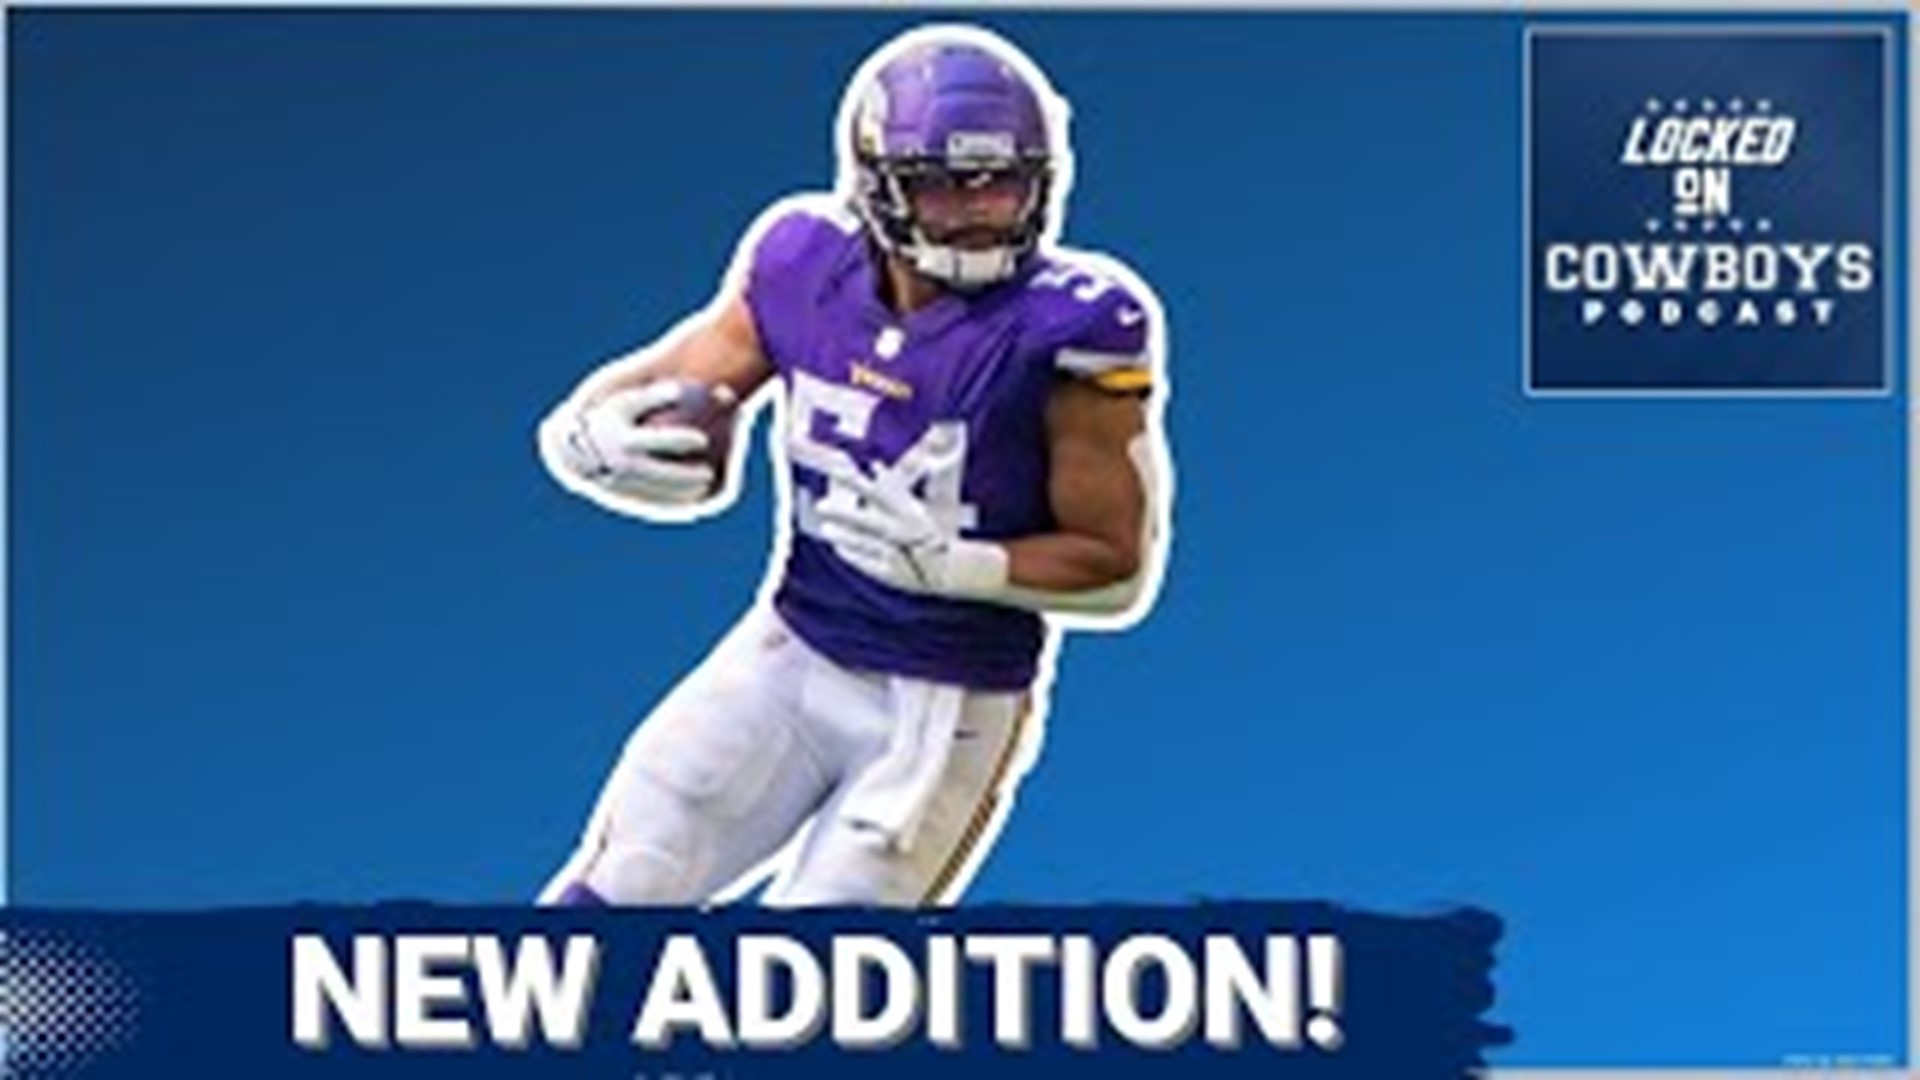 The Dallas Cowboys have officially signed their first free agent, locking up LB Eric Kendricks to a one-year deal. What kind of impact can he have right away?